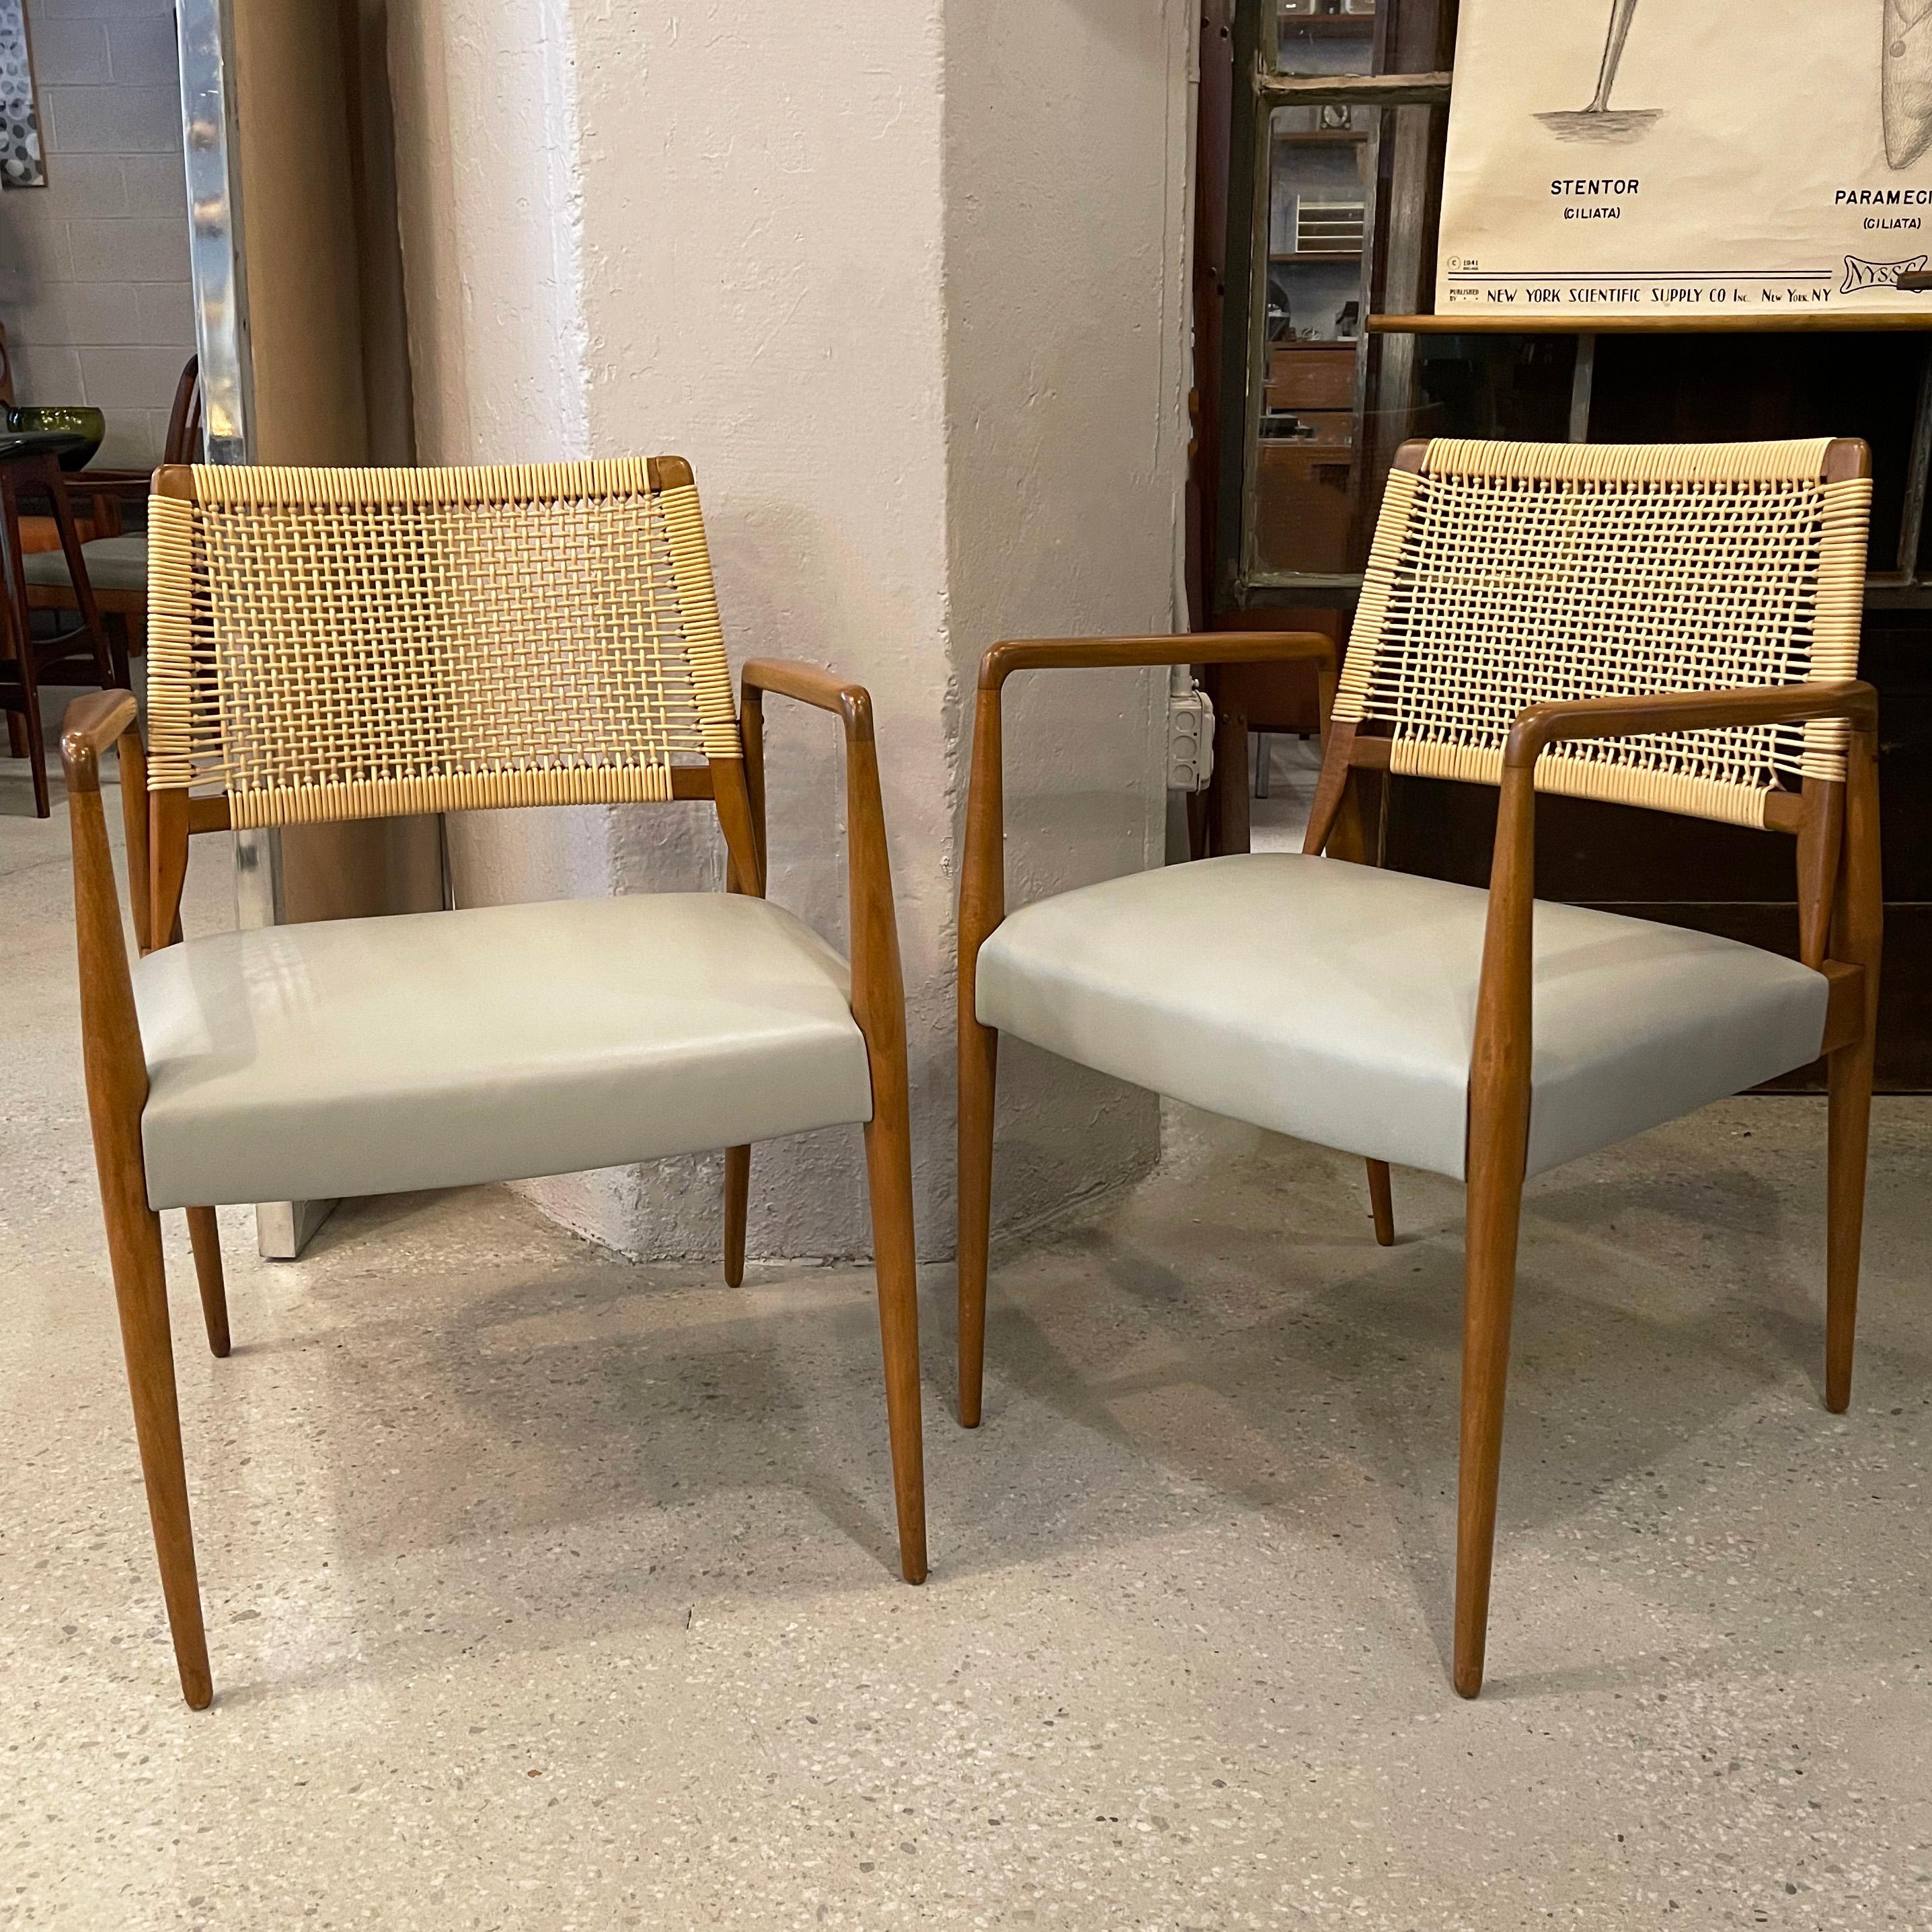 Stunning pair of Italian, Mid-Century Modern, armchairs feature sculptural beech frames with baby blue leather seats and woven rattan backs.